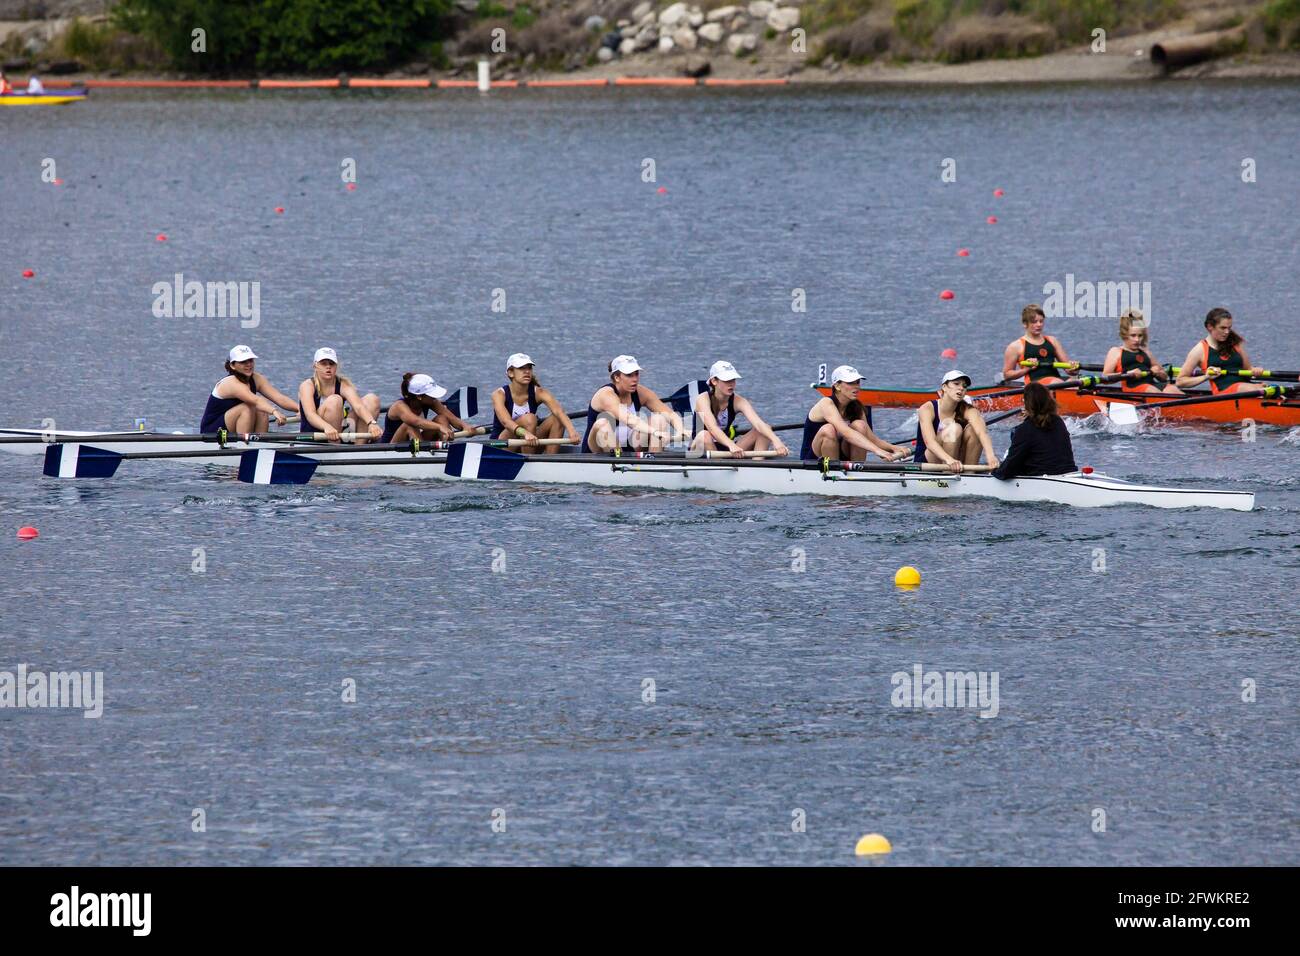 Young women's eight rowing teams in close race at Lake Natoma, California Stock Photo